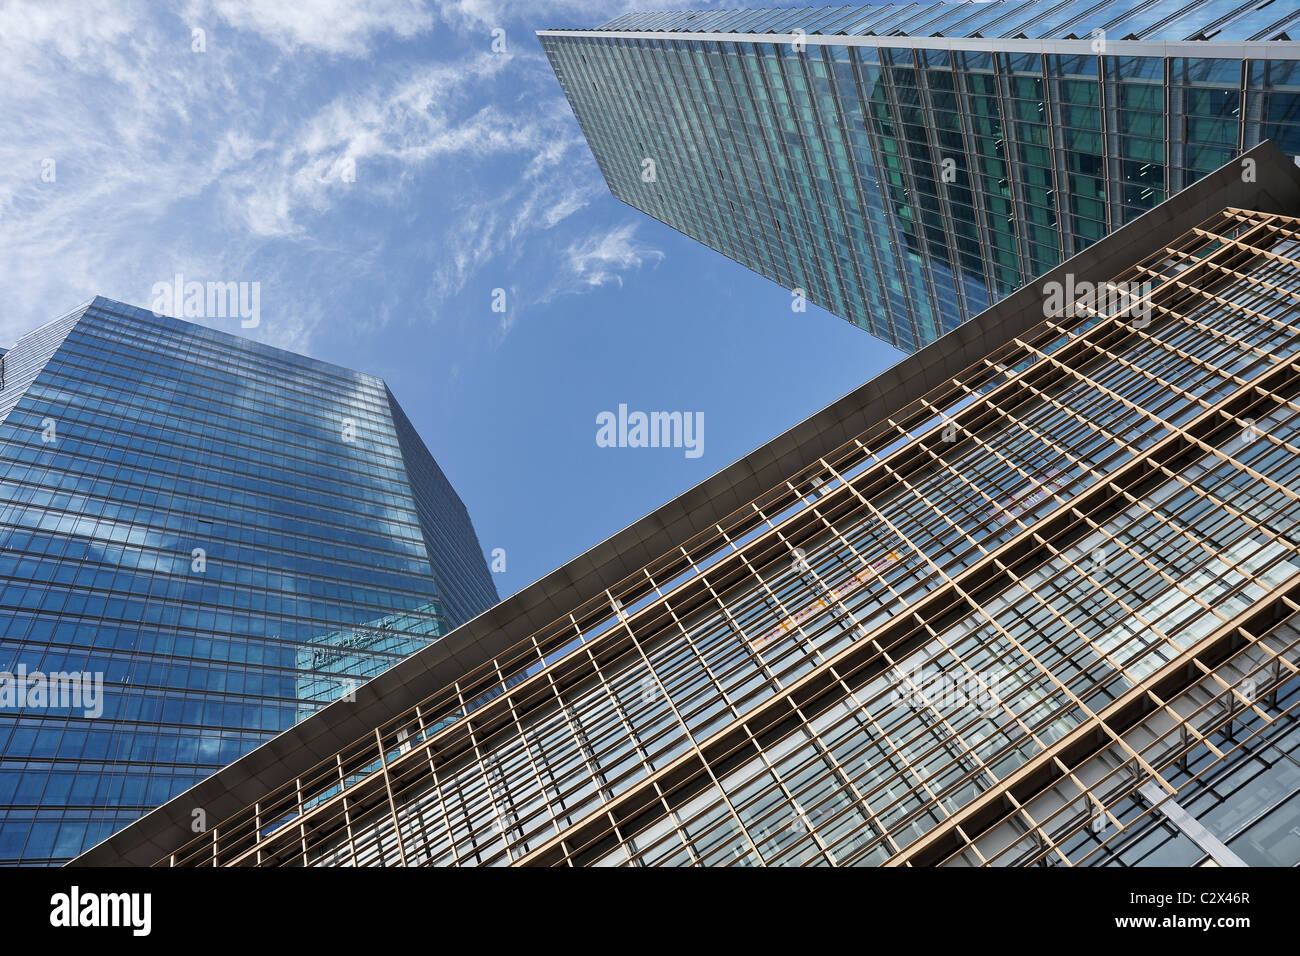 Modern architecture, skyscrapers with glass surface in Beijing central business district, Beijing, China Stock Photo